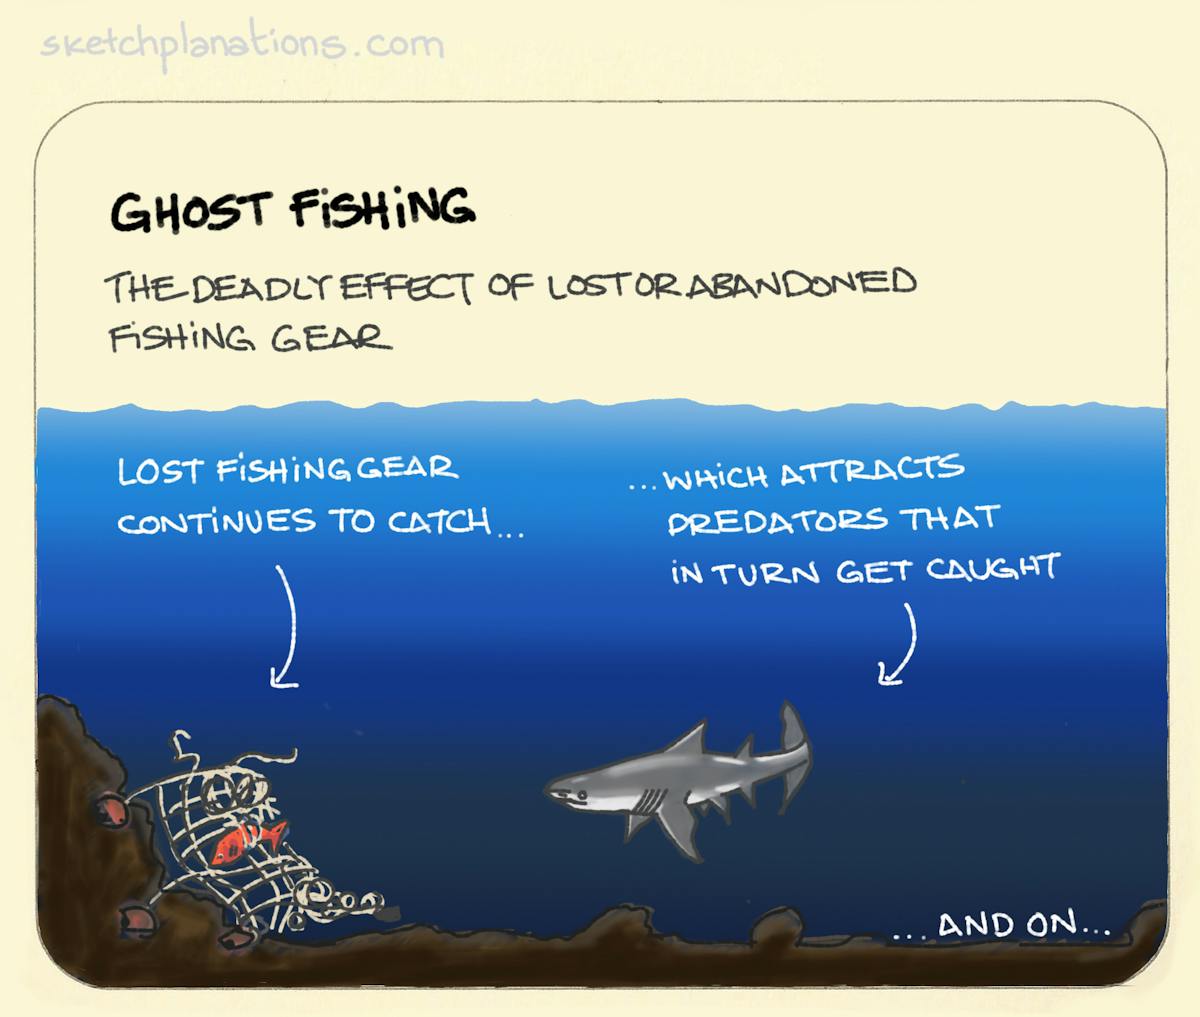 Ghost fishing - Sketchplanations